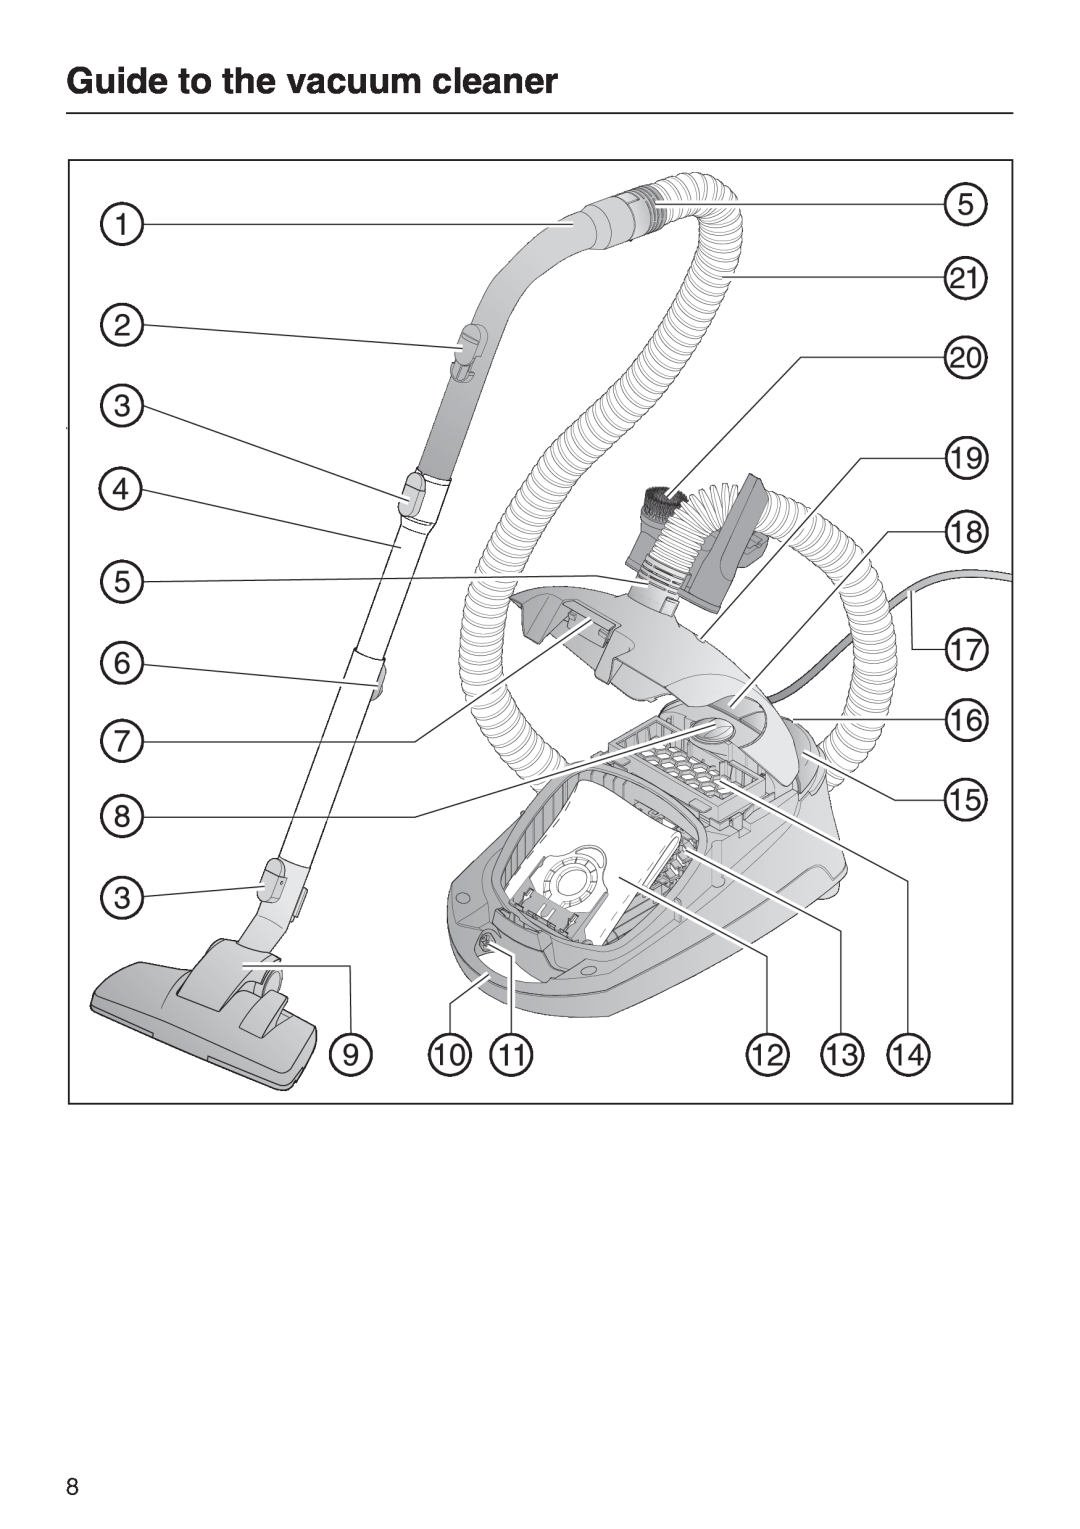 Miele S 2001 manual Guide to the vacuum cleaner 